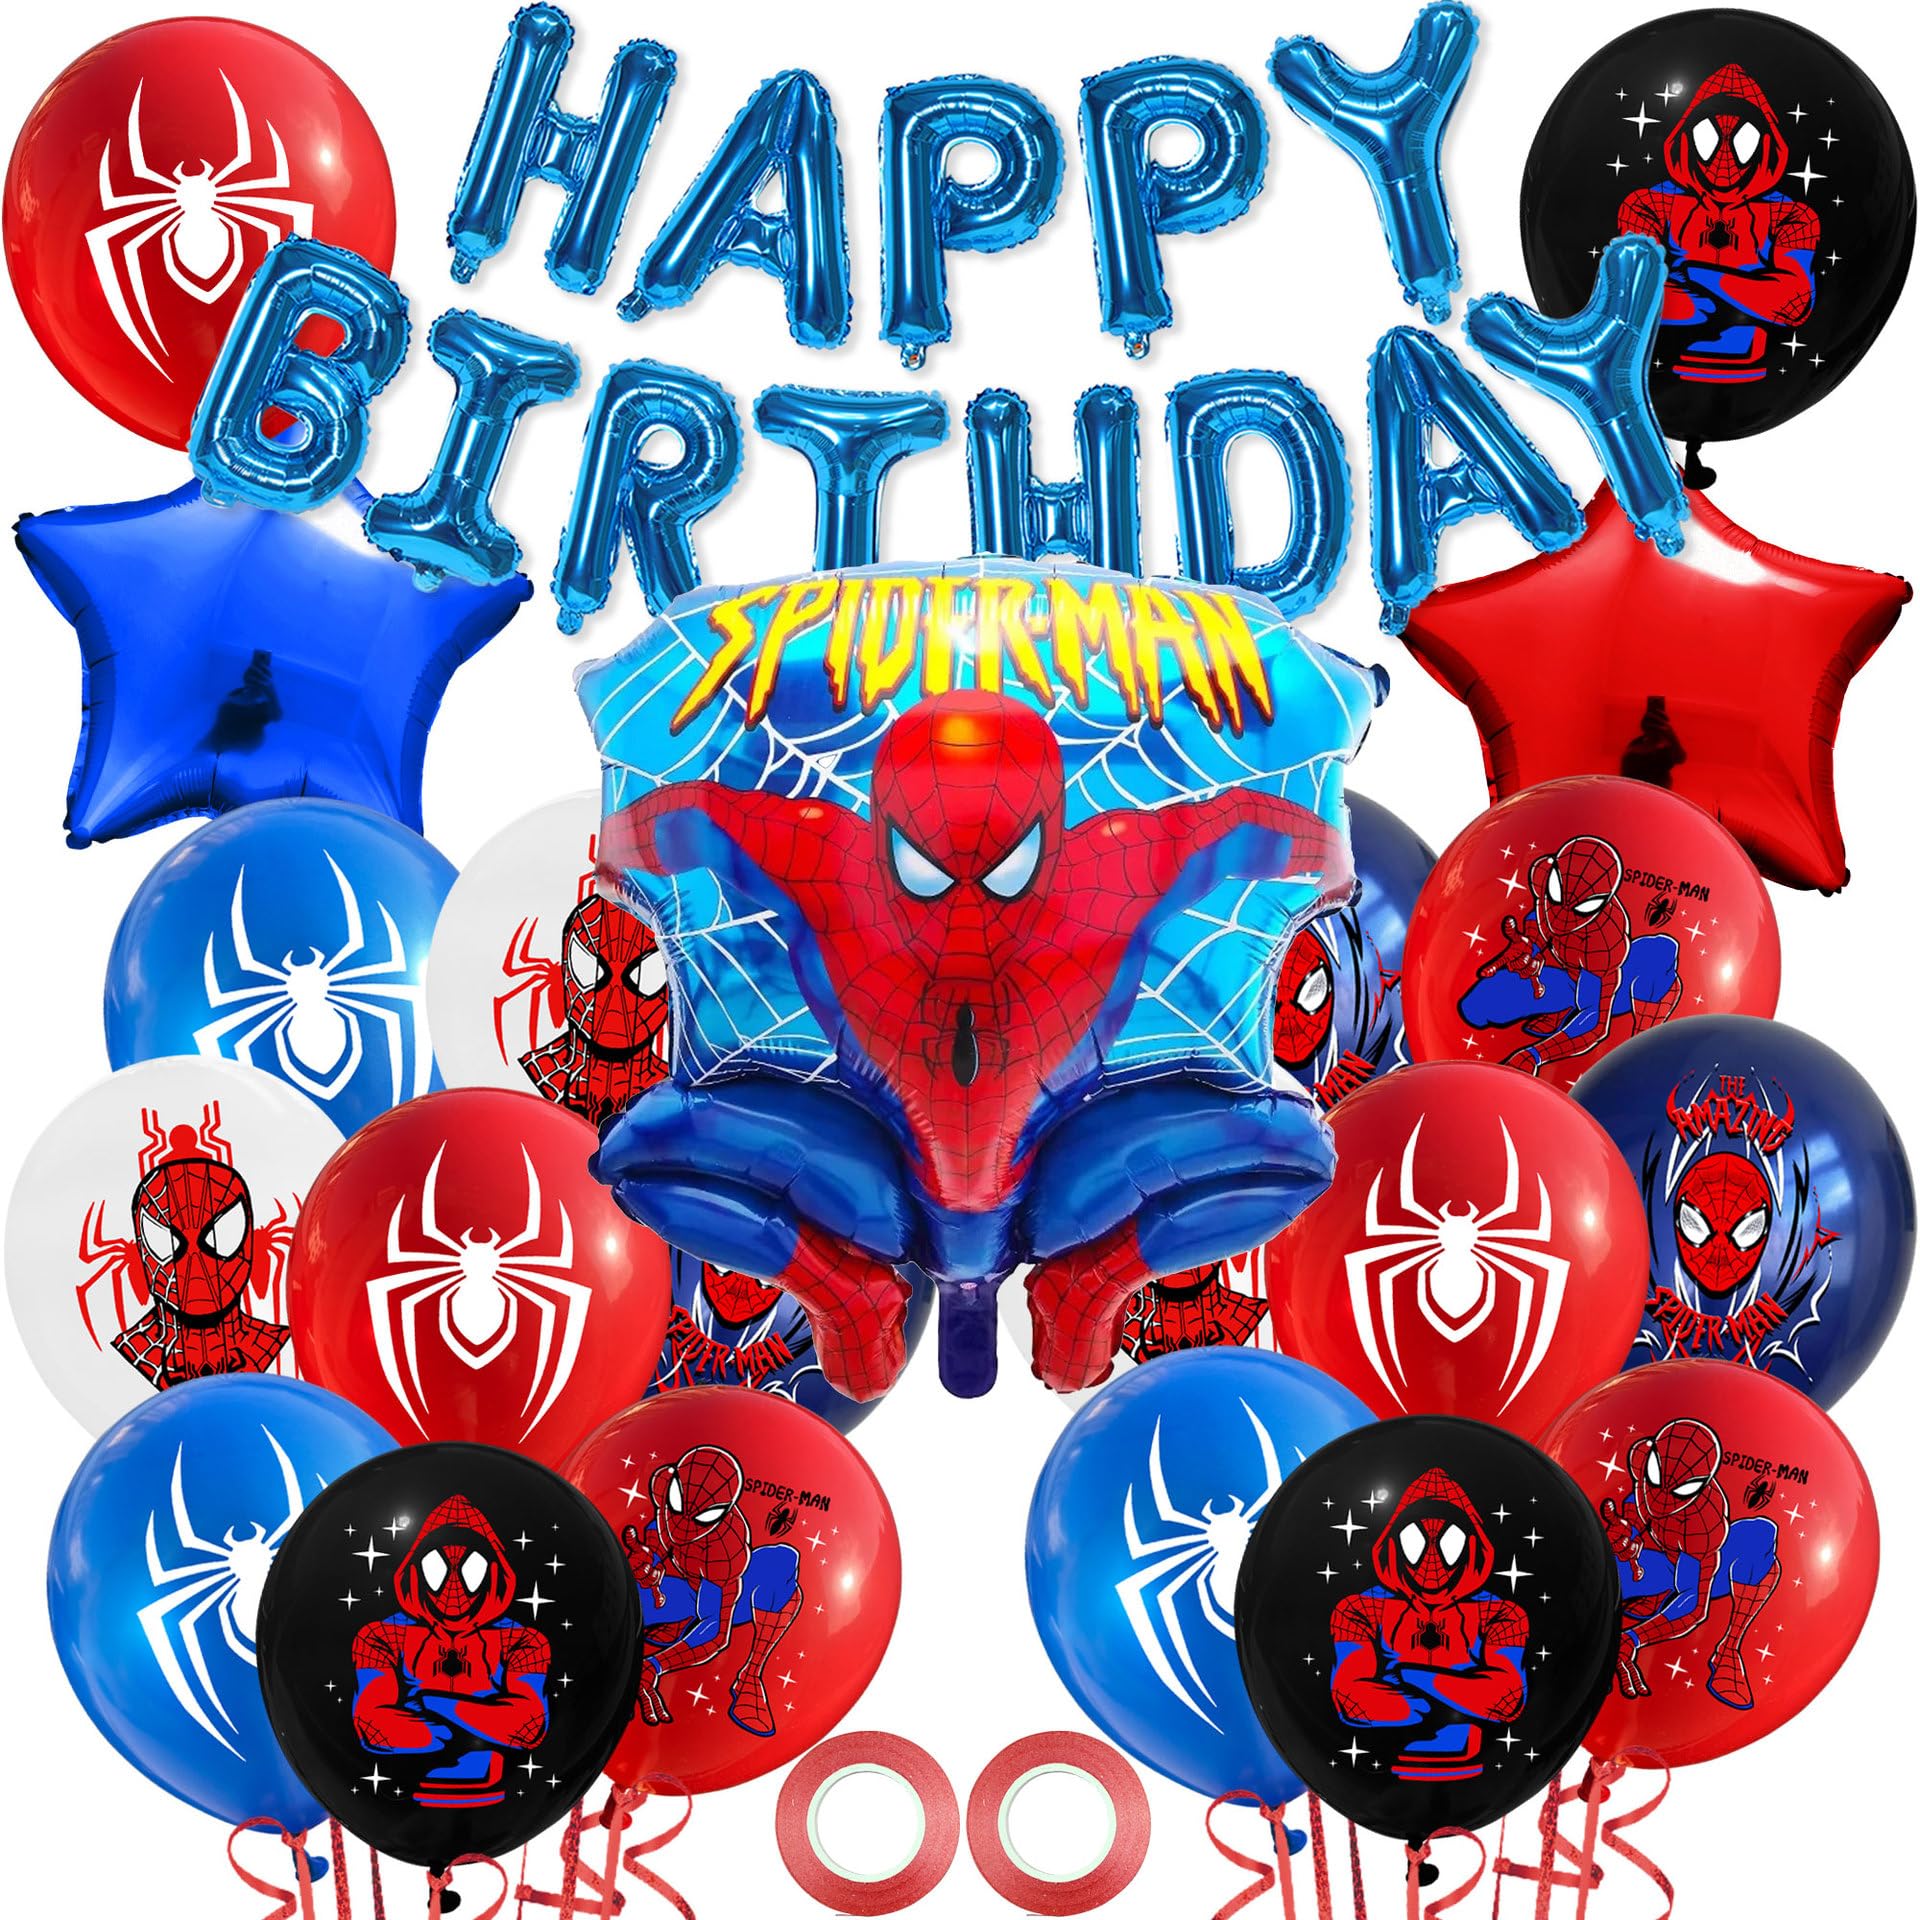 Yiran 18pcs 6styles for Spiderman Balloons Dark Red Black Blue White,12inch Latex Balloon for Adult Kids Boys Superhero Theme Birthday Party Supplies Decorations Spiderman Party Bag Fillers